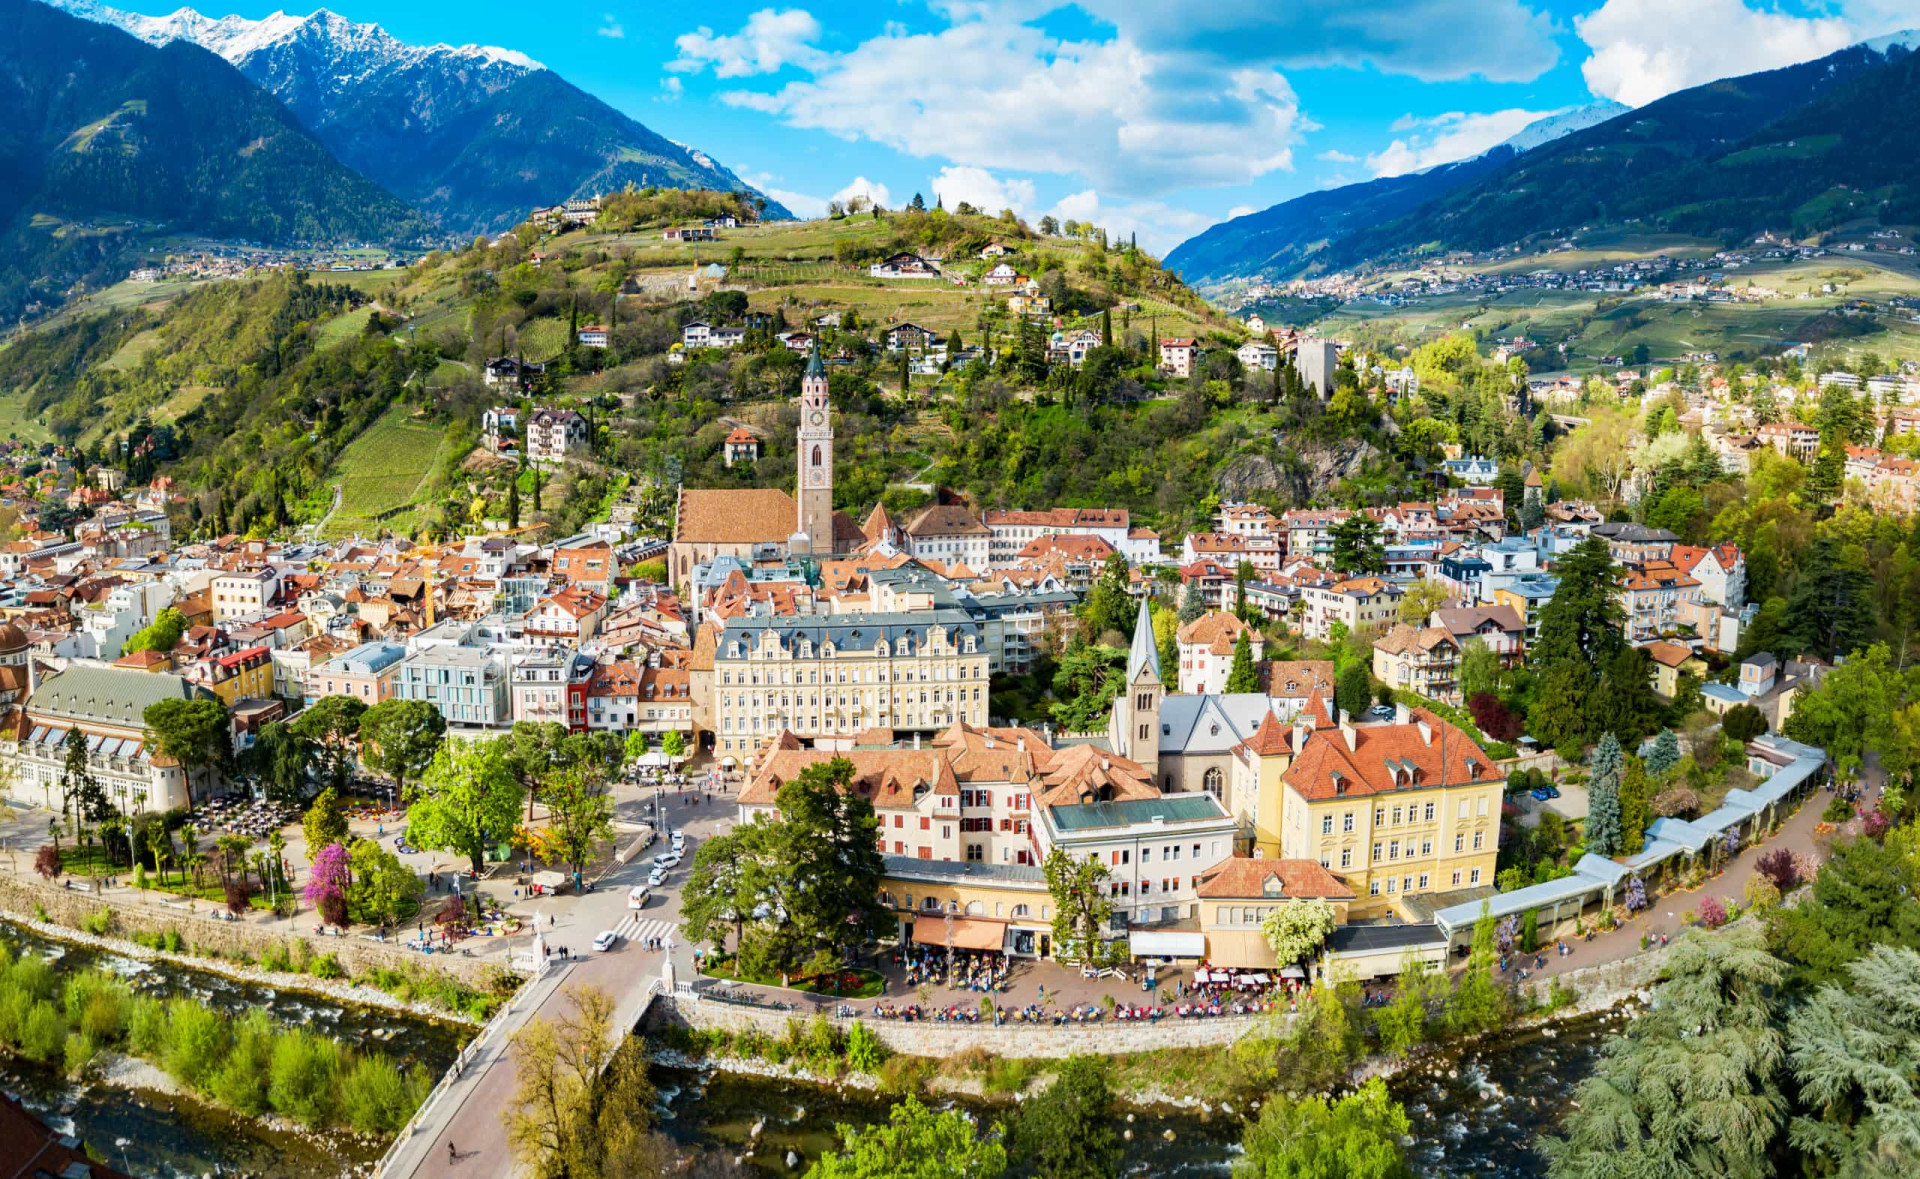 <p>Italy's mountainous South Tyrol province encloses several delightful towns and villages, including Merano. Famed as a spa resort, Merano also entices winter sports enthusiasts to its excellent skiing facilities.</p><p>You may also like:<a href="https://www.starsinsider.com/n/407606?utm_source=msn.com&utm_medium=display&utm_campaign=referral_description&utm_content=481361v4en-en_selected"> Disturbing consequences of eating avocados</a></p>